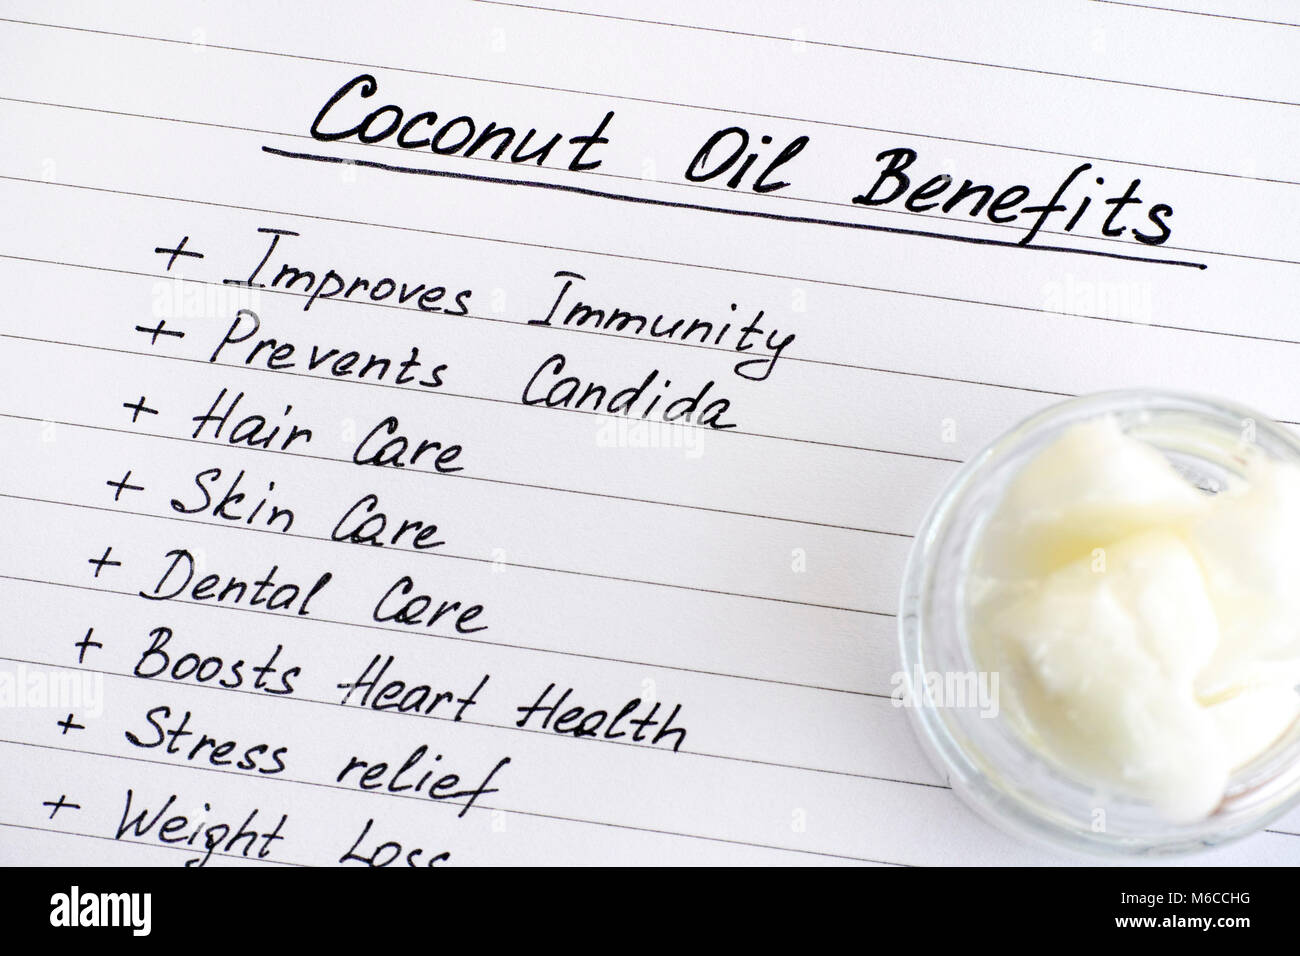 List of Coconut Oil Benefits and jar with coconut oil. Close-up. Stock Photo